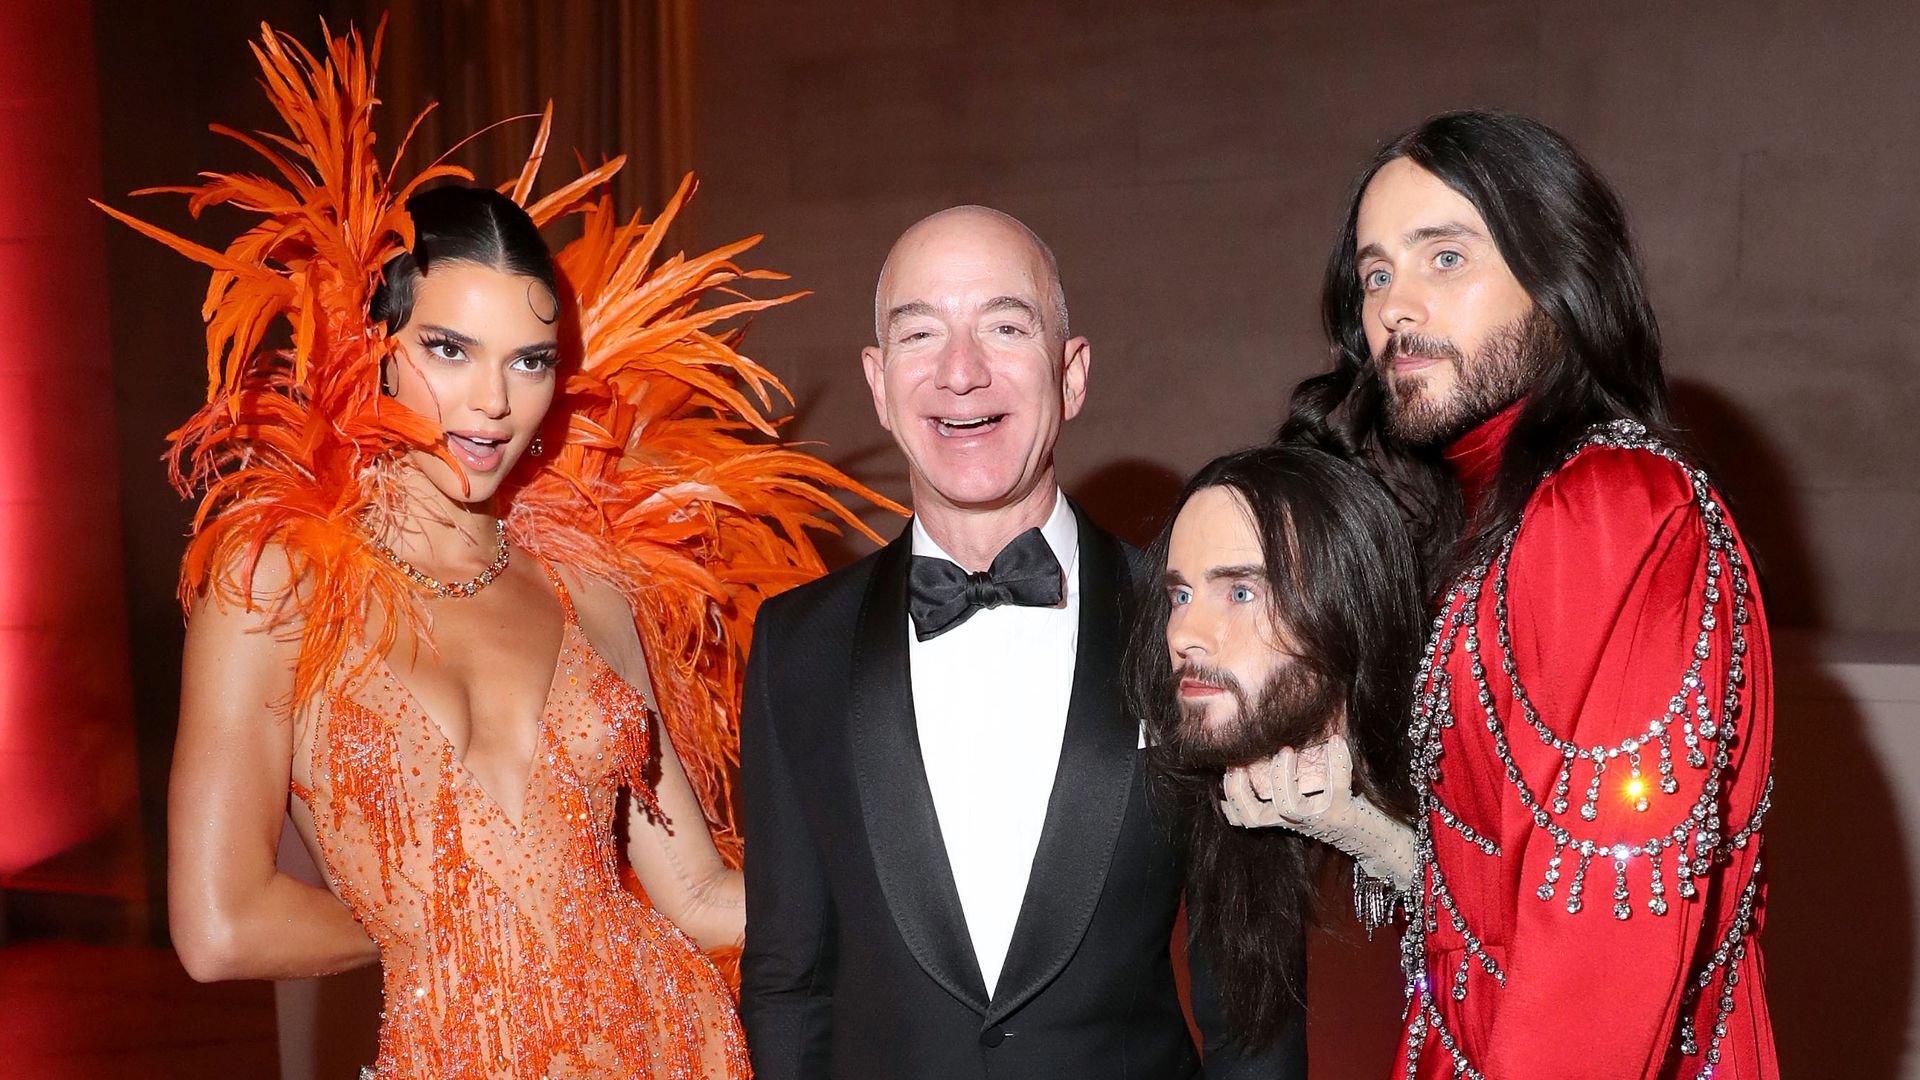 Jeff Bezos, with Kendall Jenner and Jared Leto at the 2019 Met Ball.